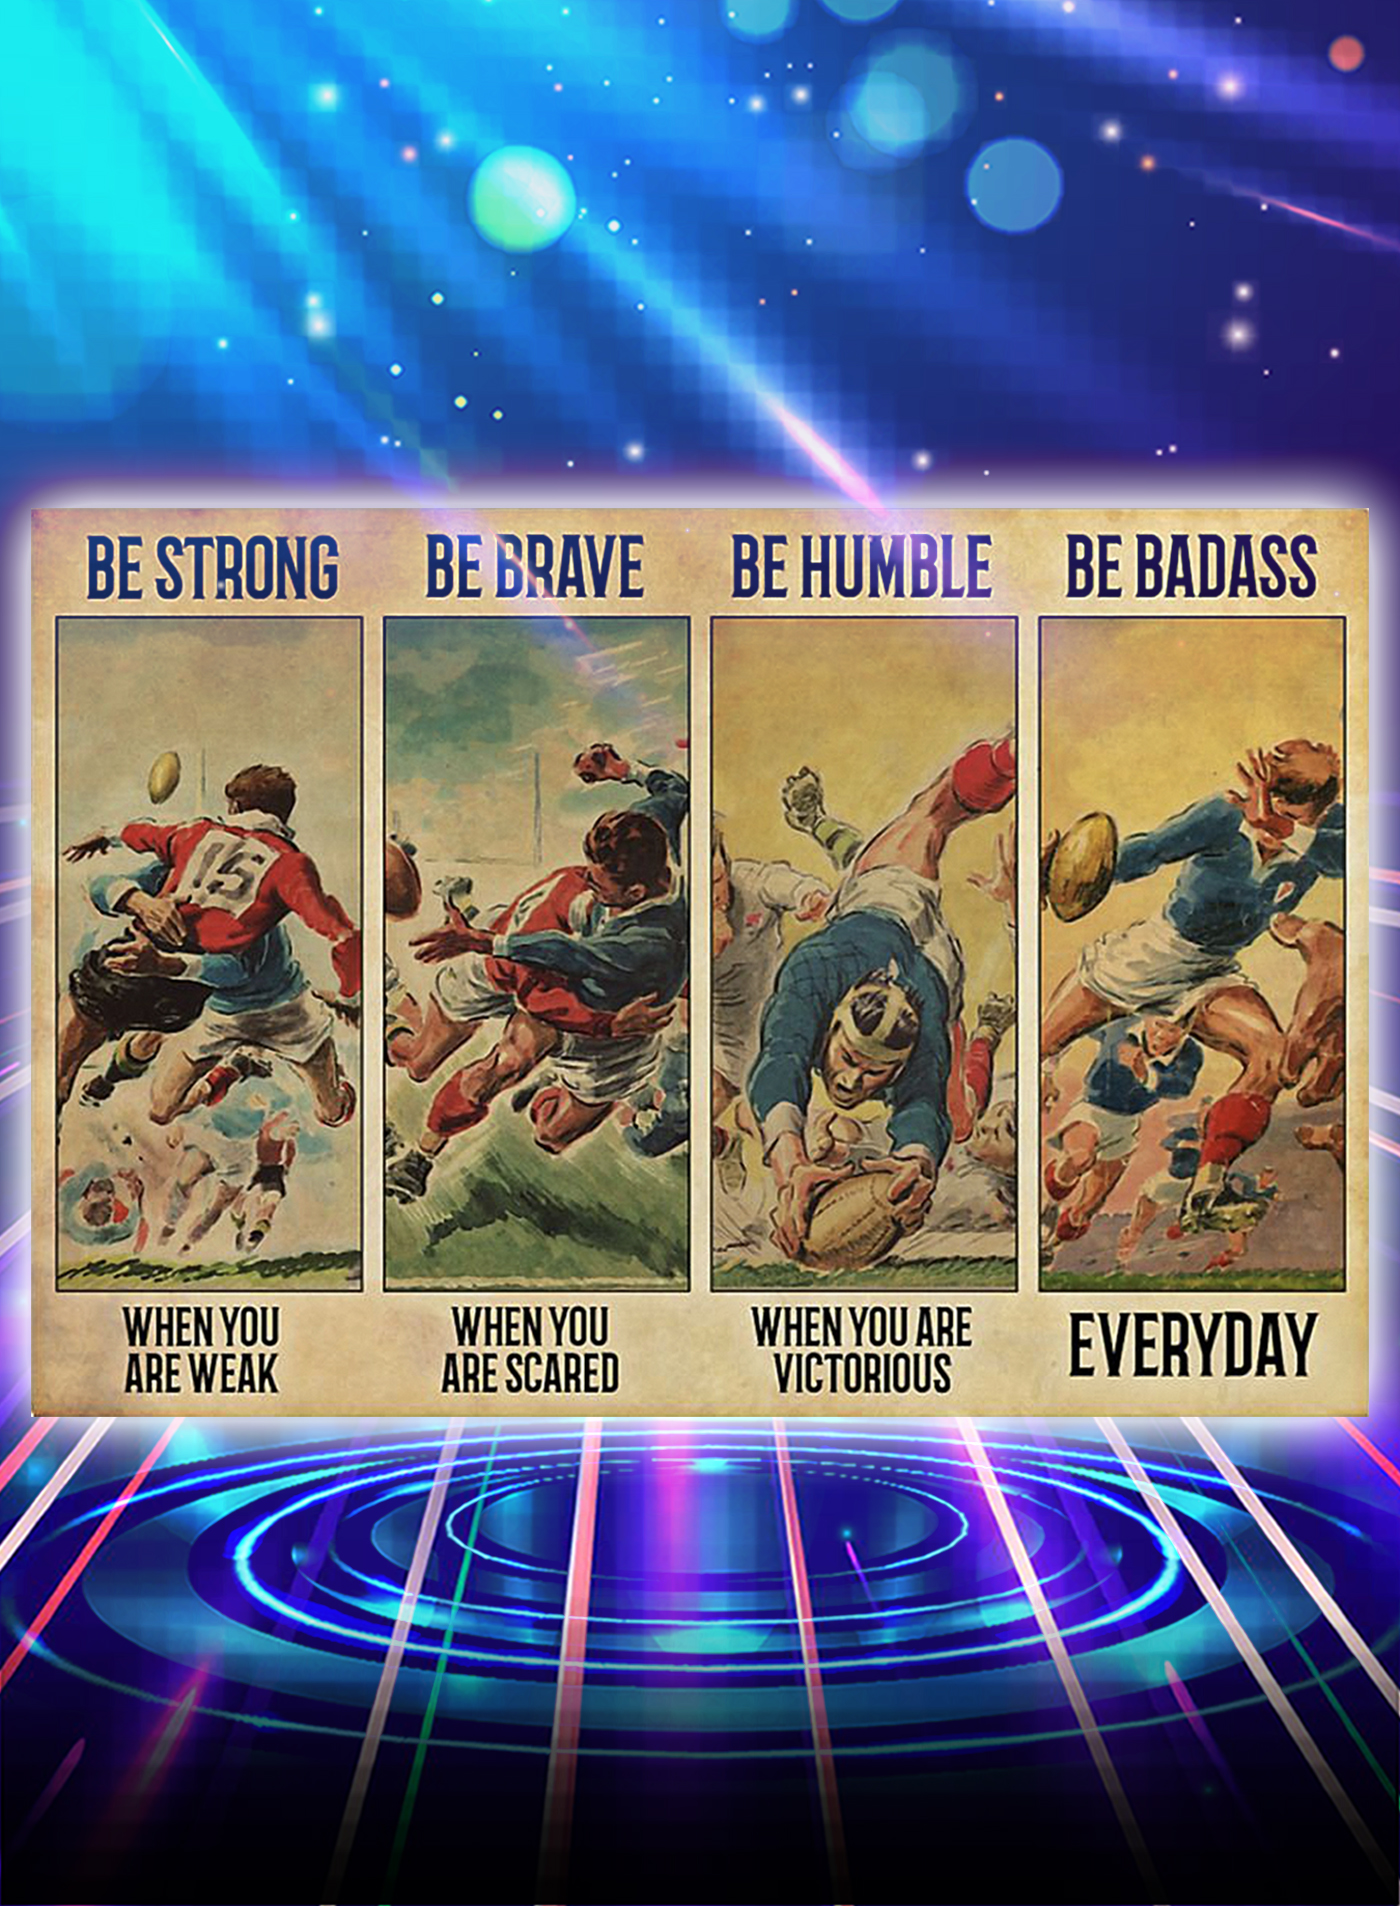 Rugby be strong be brave be humble be badass poster - A1